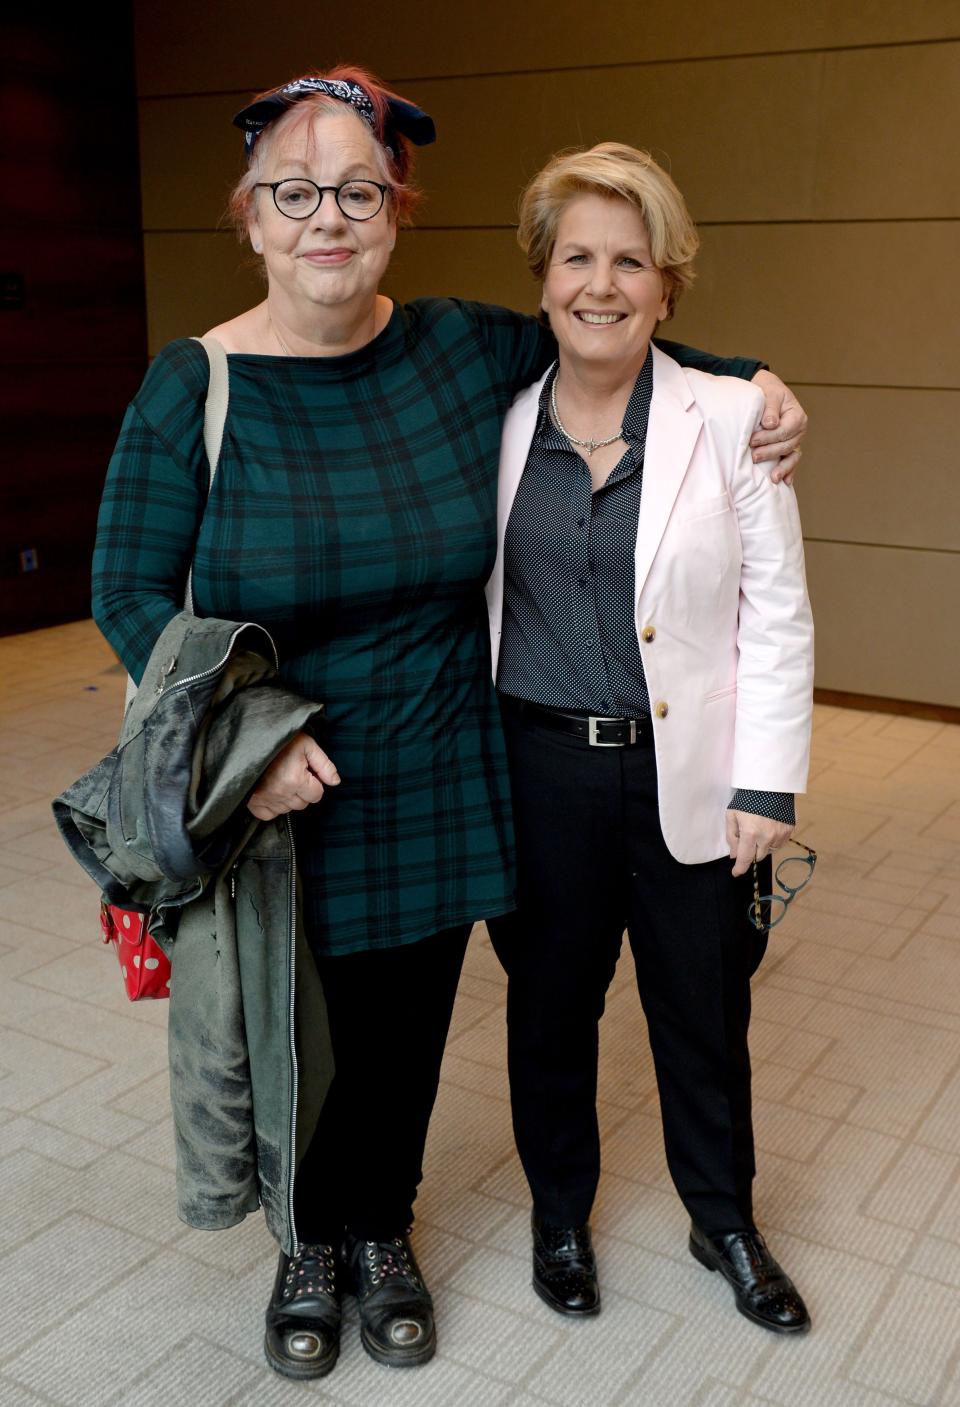 Jo Brand (left) and Sandi Toksvig attend the Women of the Year Awards 2015 at the InterContinental hotel, London.